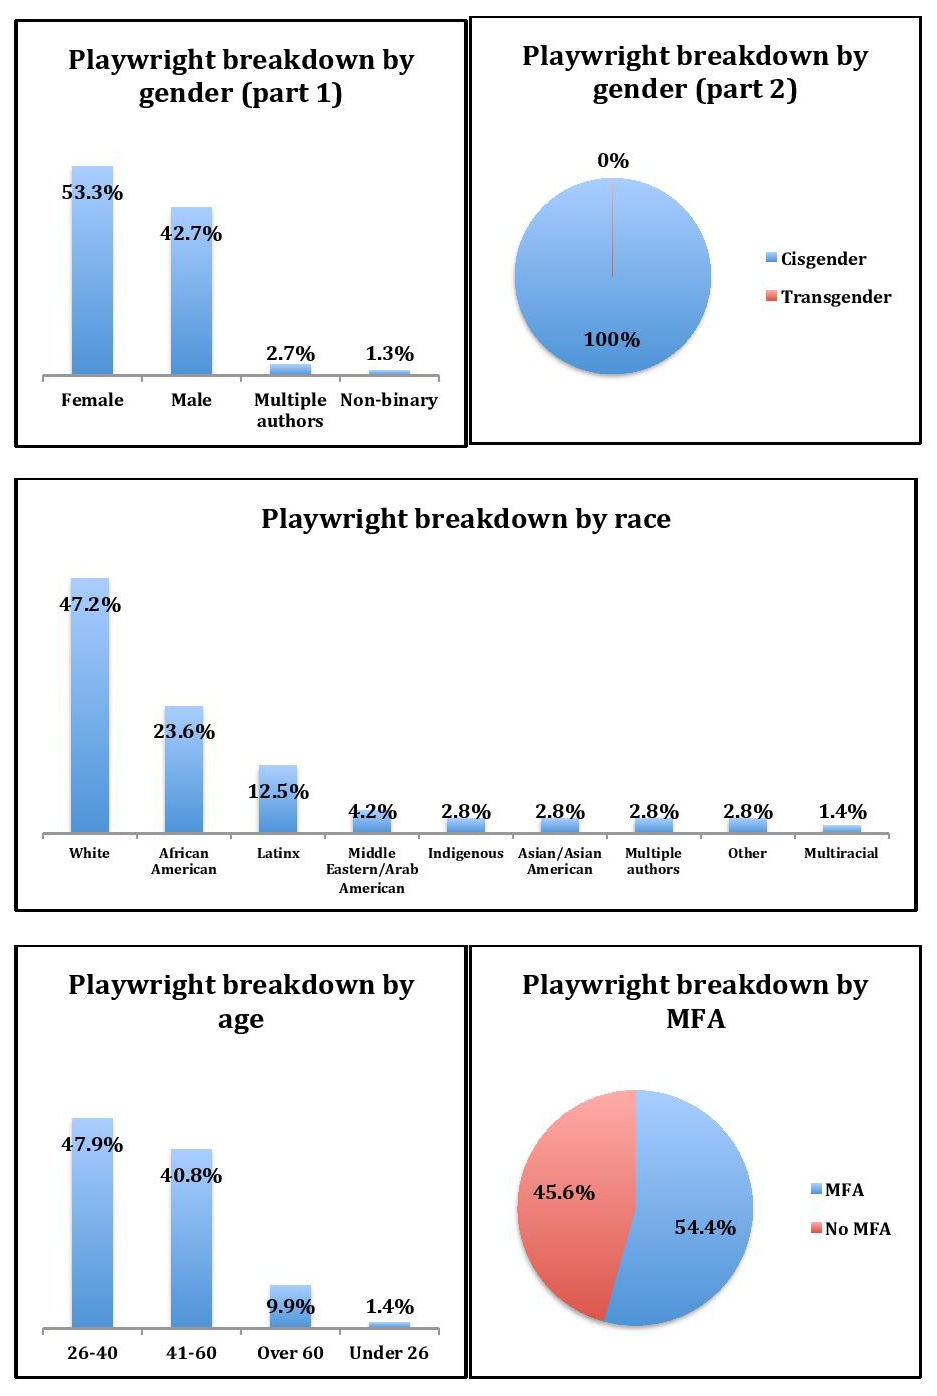 five graphs: Playwright breakdown by gender (part 1 and 2), Playwright breakdown by race, Playwright breakdown by age, Playwright breakdown by MFA